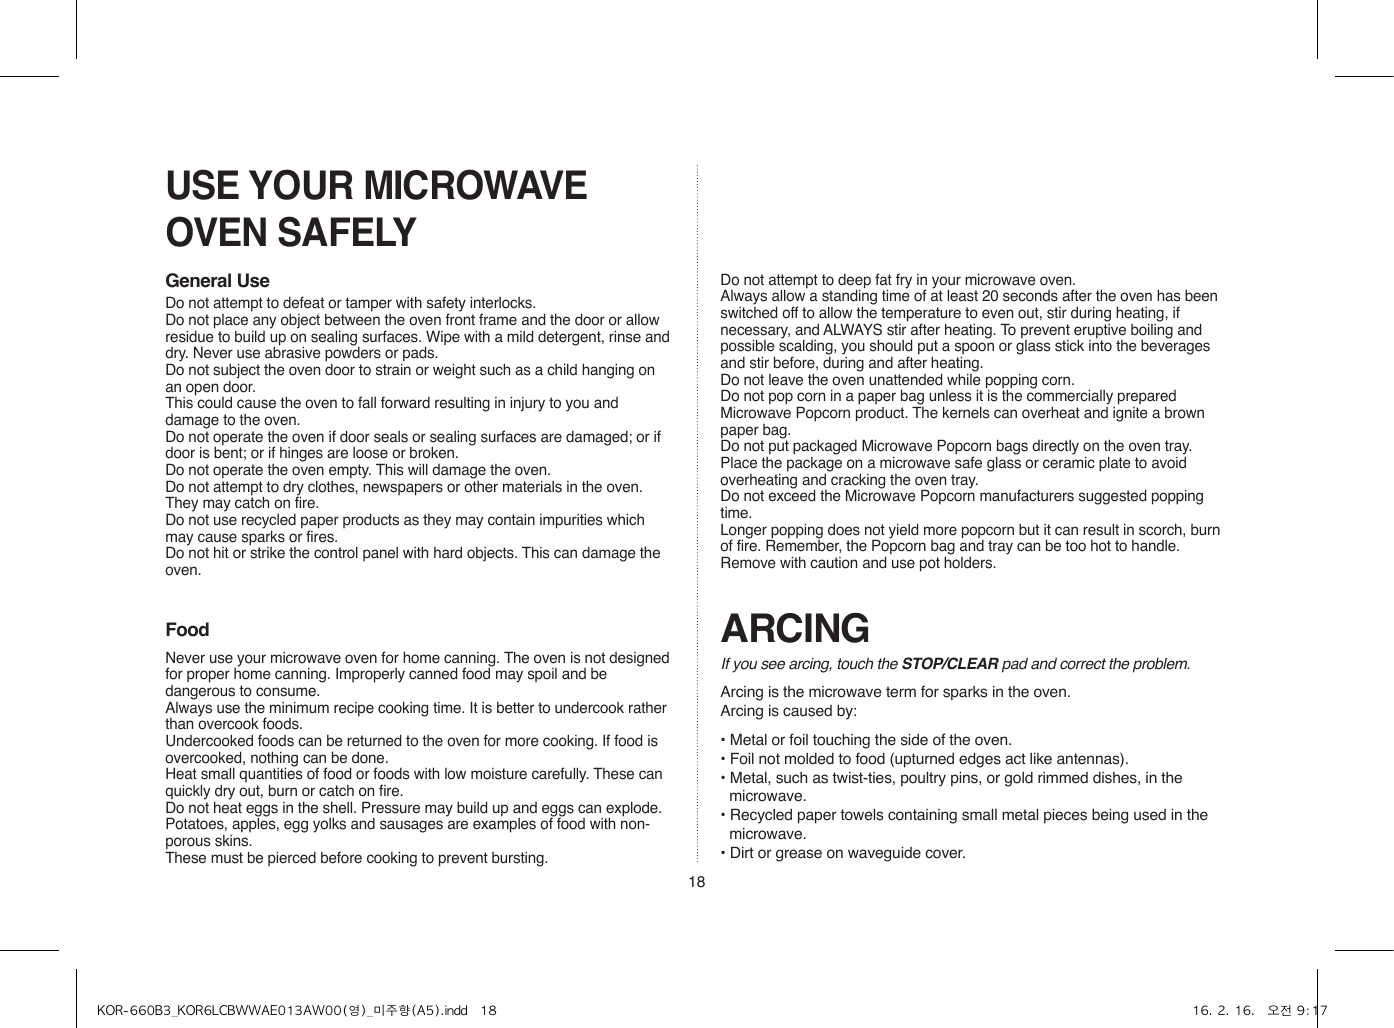 18USE YOUR MICROWAVE OVEN SAFELYGeneral UseFood ARCINGIf you see arcing, touch the STOP/CLEAR pad and correct the problem.Arcing is the microwave term for sparks in the oven.Arcing is caused by:• Metal or foil touching the side of the oven.• Foil not molded to food (upturned edges act like antennas).• Metal, such as twist-ties, poultry pins, or gold rimmed dishes, in the microwave.• Recycled paper towels containing small metal pieces being used in the microwave.• Dirt or grease on waveguide cover.Do not attempt to defeat or tamper with safety interlocks.Do not place any object between the oven front frame and the door or allow residue to build up on sealing surfaces. Wipe with a mild detergent, rinse and dry. Never use abrasive powders or pads.Do not subject the oven door to strain or weight such as a child hanging on an open door.This could cause the oven to fall forward resulting in injury to you and damage to the oven.Do not operate the oven if door seals or sealing surfaces are damaged; or if door is bent; or if hinges are loose or broken.Do not operate the oven empty. This will damage the oven.Do not attempt to dry clothes, newspapers or other materials in the oven. They may catch on fire.Do not use recycled paper products as they may contain impurities which may cause sparks or fires.Do not hit or strike the control panel with hard objects. This can damage the oven.Never use your microwave oven for home canning. The oven is not designed for proper home canning. Improperly canned food may spoil and be dangerous to consume.Always use the minimum recipe cooking time. It is better to undercook rather than overcook foods. Undercooked foods can be returned to the oven for more cooking. If food is overcooked, nothing can be done.Heat small quantities of food or foods with low moisture carefully. These can quickly dry out, burn or catch on fire.Do not heat eggs in the shell. Pressure may build up and eggs can explode.Potatoes, apples, egg yolks and sausages are examples of food with non-porous skins.These must be pierced before cooking to prevent bursting.Do not attempt to deep fat fry in your microwave oven.Always allow a standing time of at least 20 seconds after the oven has been switched off to allow the temperature to even out, stir during heating, if necessary, and ALWAYS stir after heating. To prevent eruptive boiling and possible scalding, you should put a spoon or glass stick into the beverages and stir before, during and after heating.Do not leave the oven unattended while popping corn.Do not pop corn in a paper bag unless it is the commercially prepared Microwave Popcorn product. The kernels can overheat and ignite a brown paper bag.Do not put packaged Microwave Popcorn bags directly on the oven tray. Place the package on a microwave safe glass or ceramic plate to avoid overheating and cracking the oven tray.Do not exceed the Microwave Popcorn manufacturers suggested popping time. Longer popping does not yield more popcorn but it can result in scorch, burn of fire. Remember, the Popcorn bag and tray can be too hot to handle. Remove with caution and use pot holders.KOR-660B3_KOR6LCBWWAE013AW00(영)_미주향(A5).indd   18 16. 2. 16.   오전 9:17